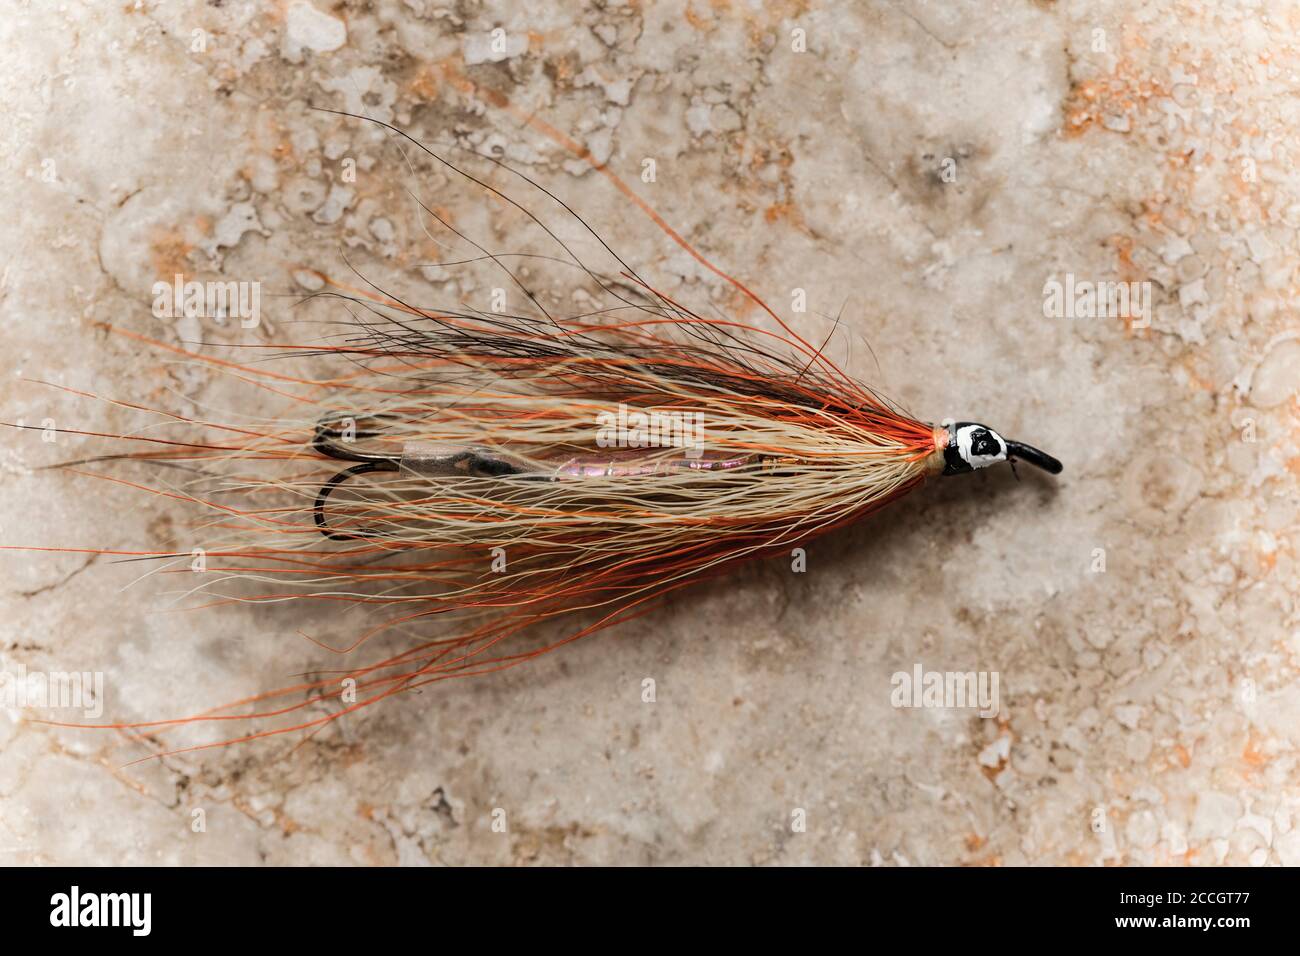 An old salmon fly, possibly homemade, from a collection of vintage